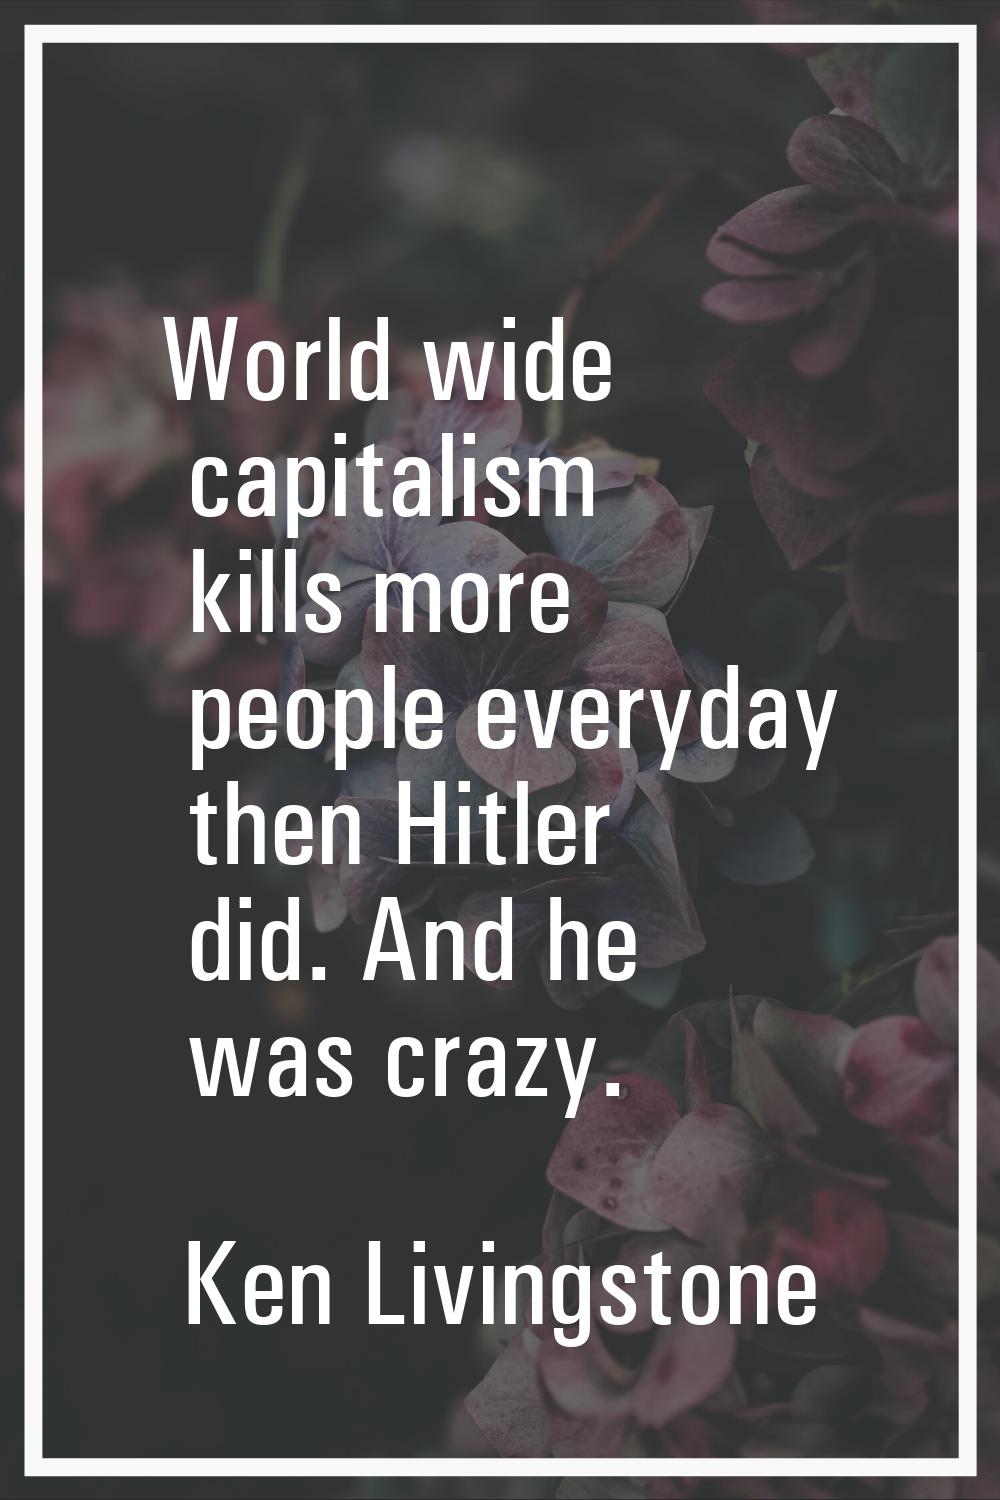 World wide capitalism kills more people everyday then Hitler did. And he was crazy.